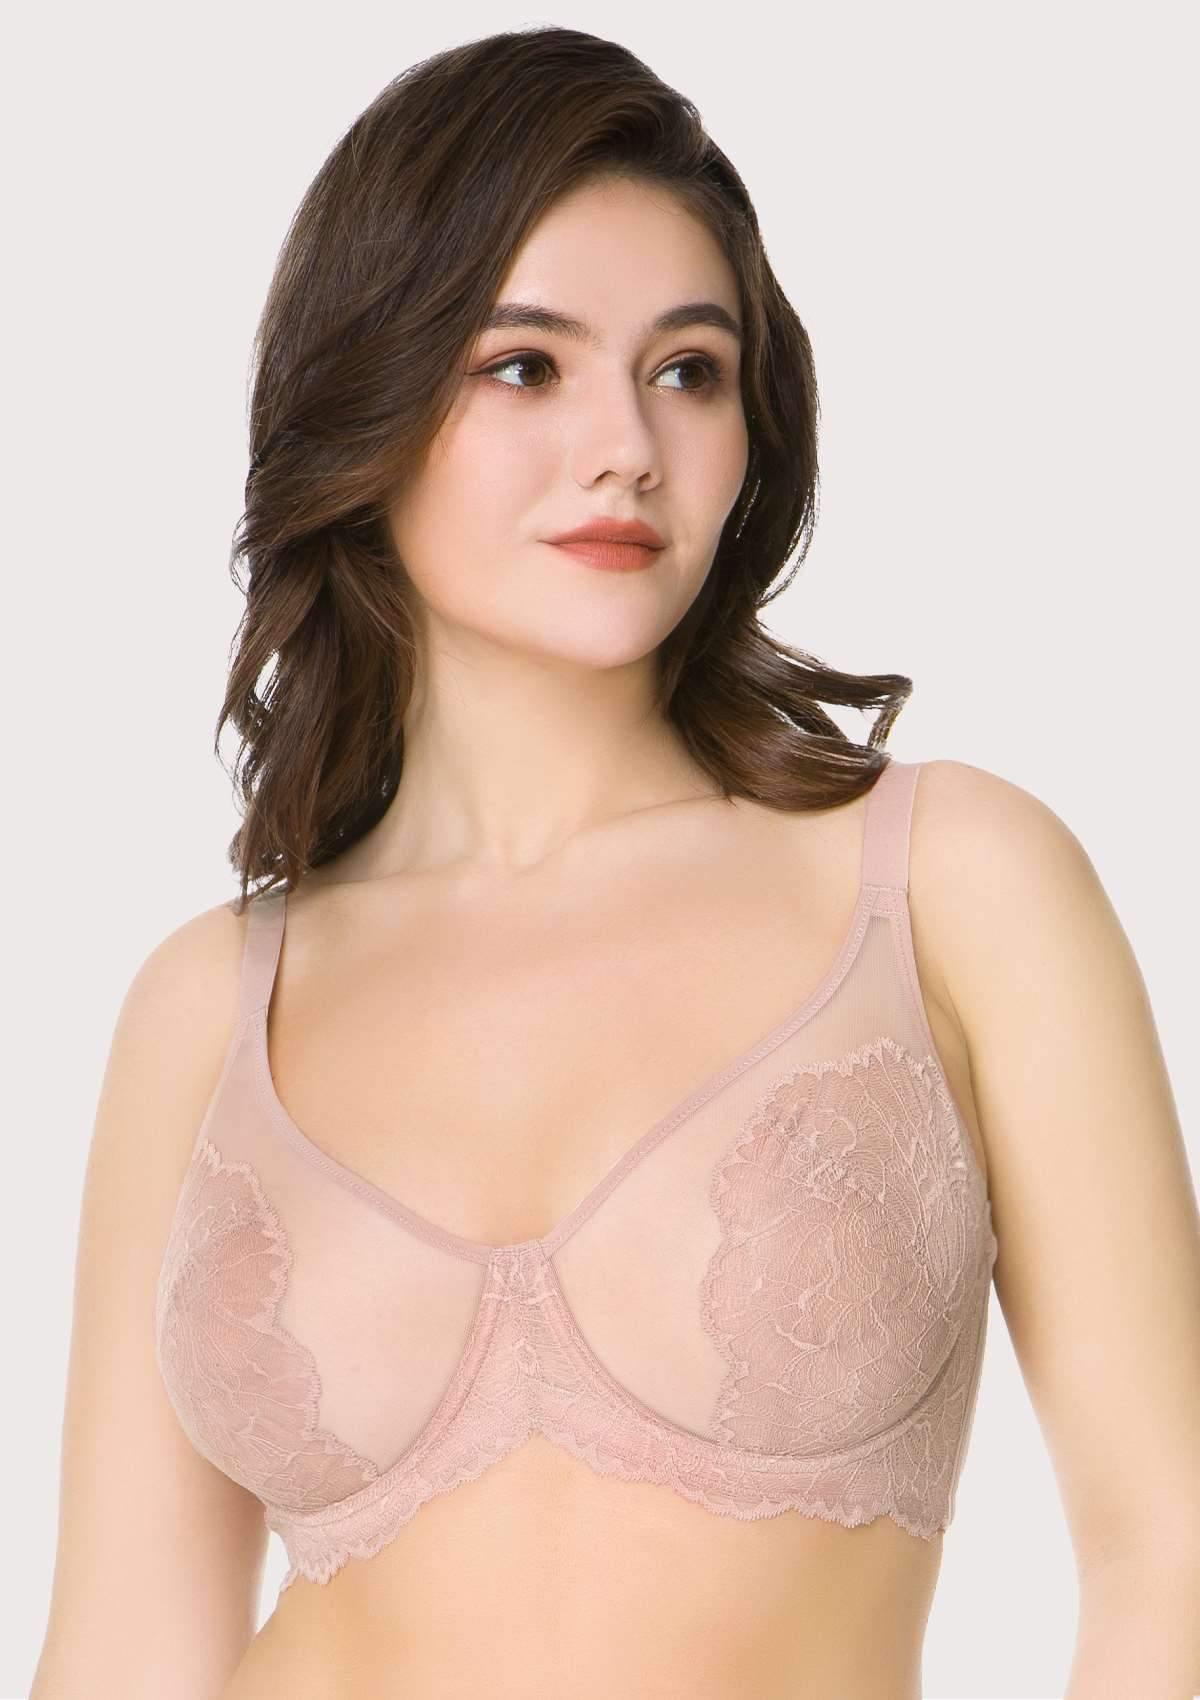 HSIA Blossom Lace Bra And Panties Set: Best Bra For Large Busts - Dark Pink / 38 / DD/E